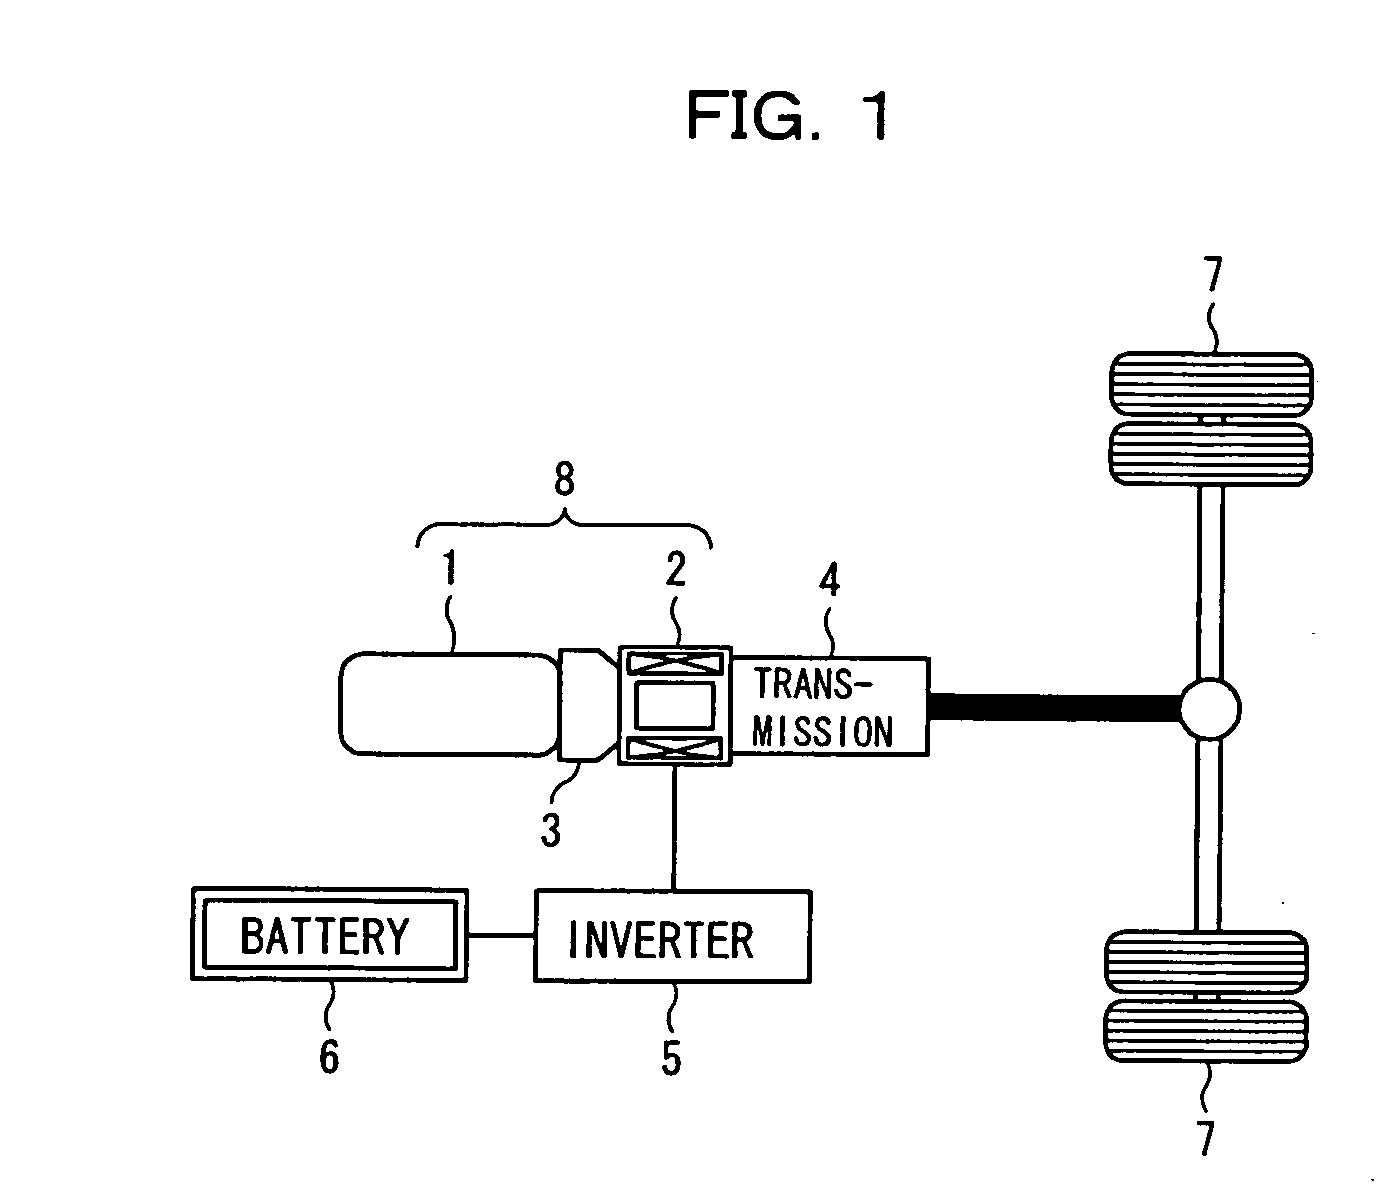 Gear shift control apparatus for a hybrid vehicle